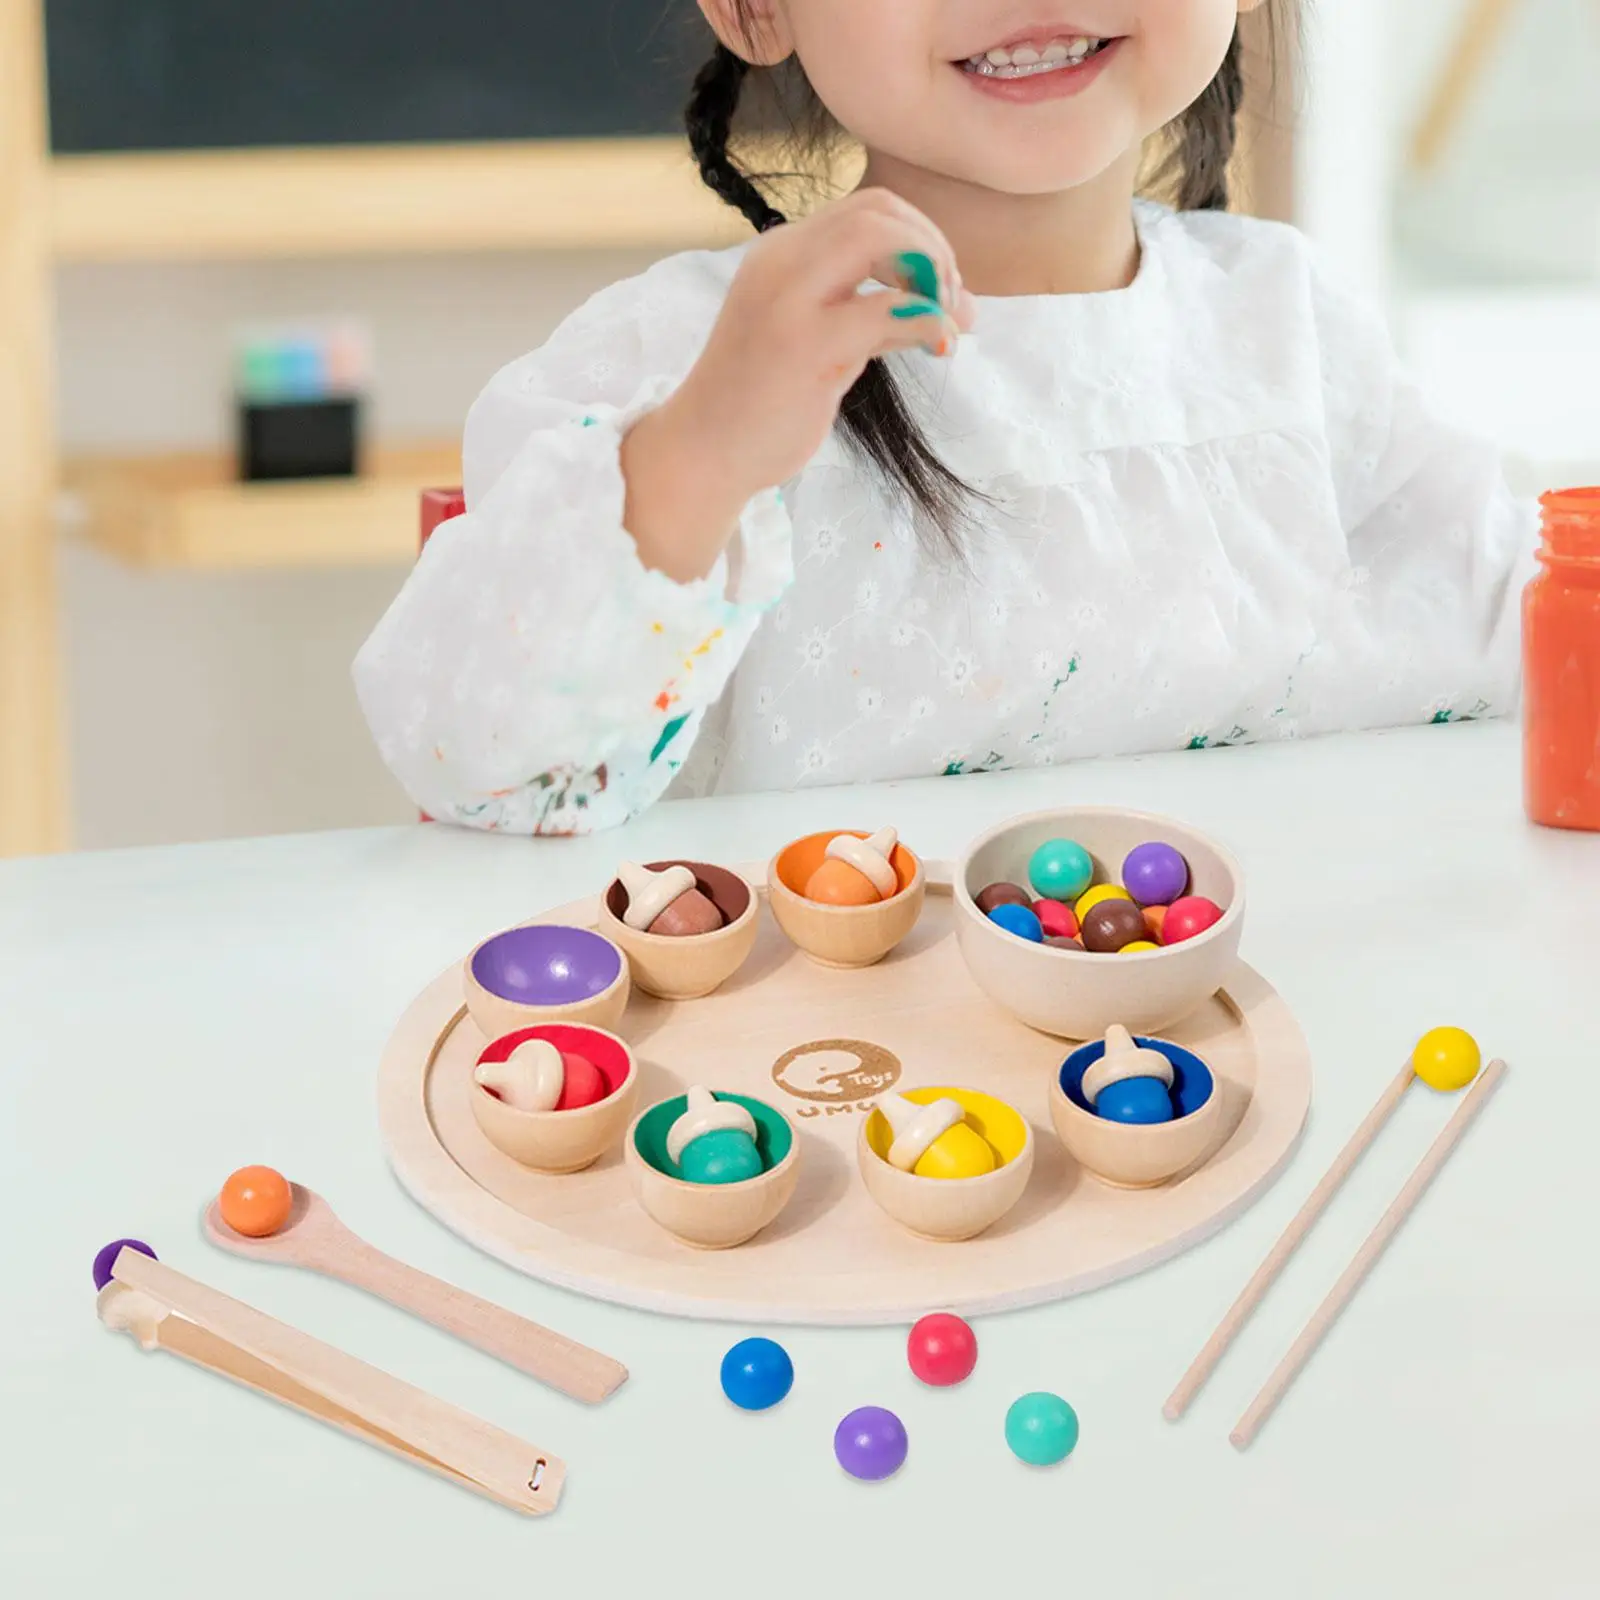 Wooden Rainbow Toys Color Classification Fine Motor Development Game Training Logical Thinking Wood Clip Beads for 1+ Year Old